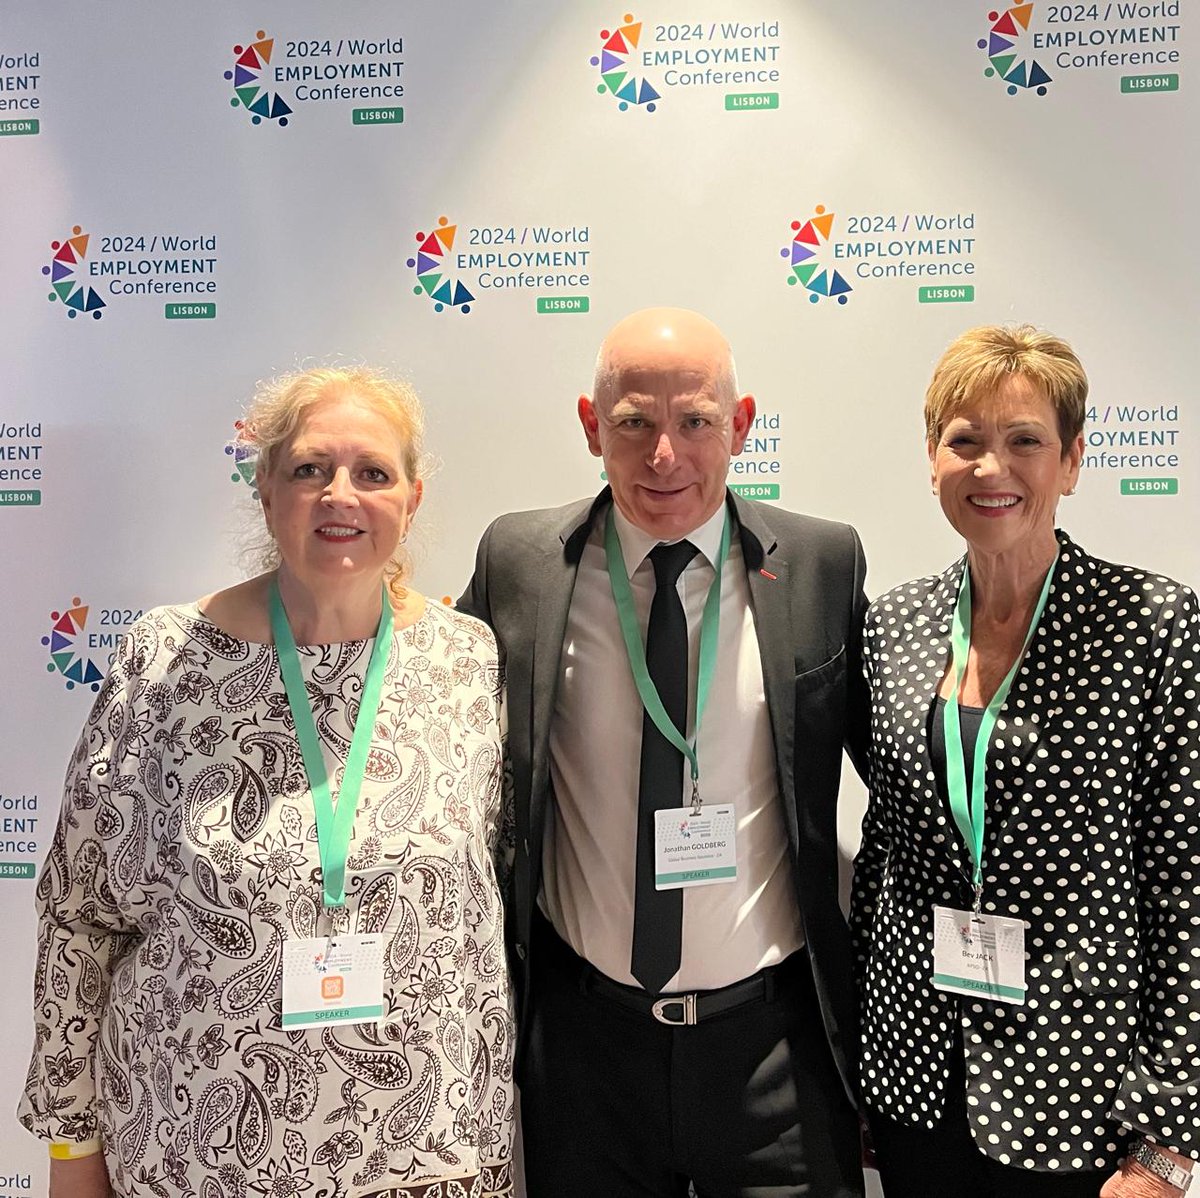 Representing our industry at the WEC - Jacqui Ford, Johnny Goldberg and Bev Jack. #WECLisbon2024 @WECglobal